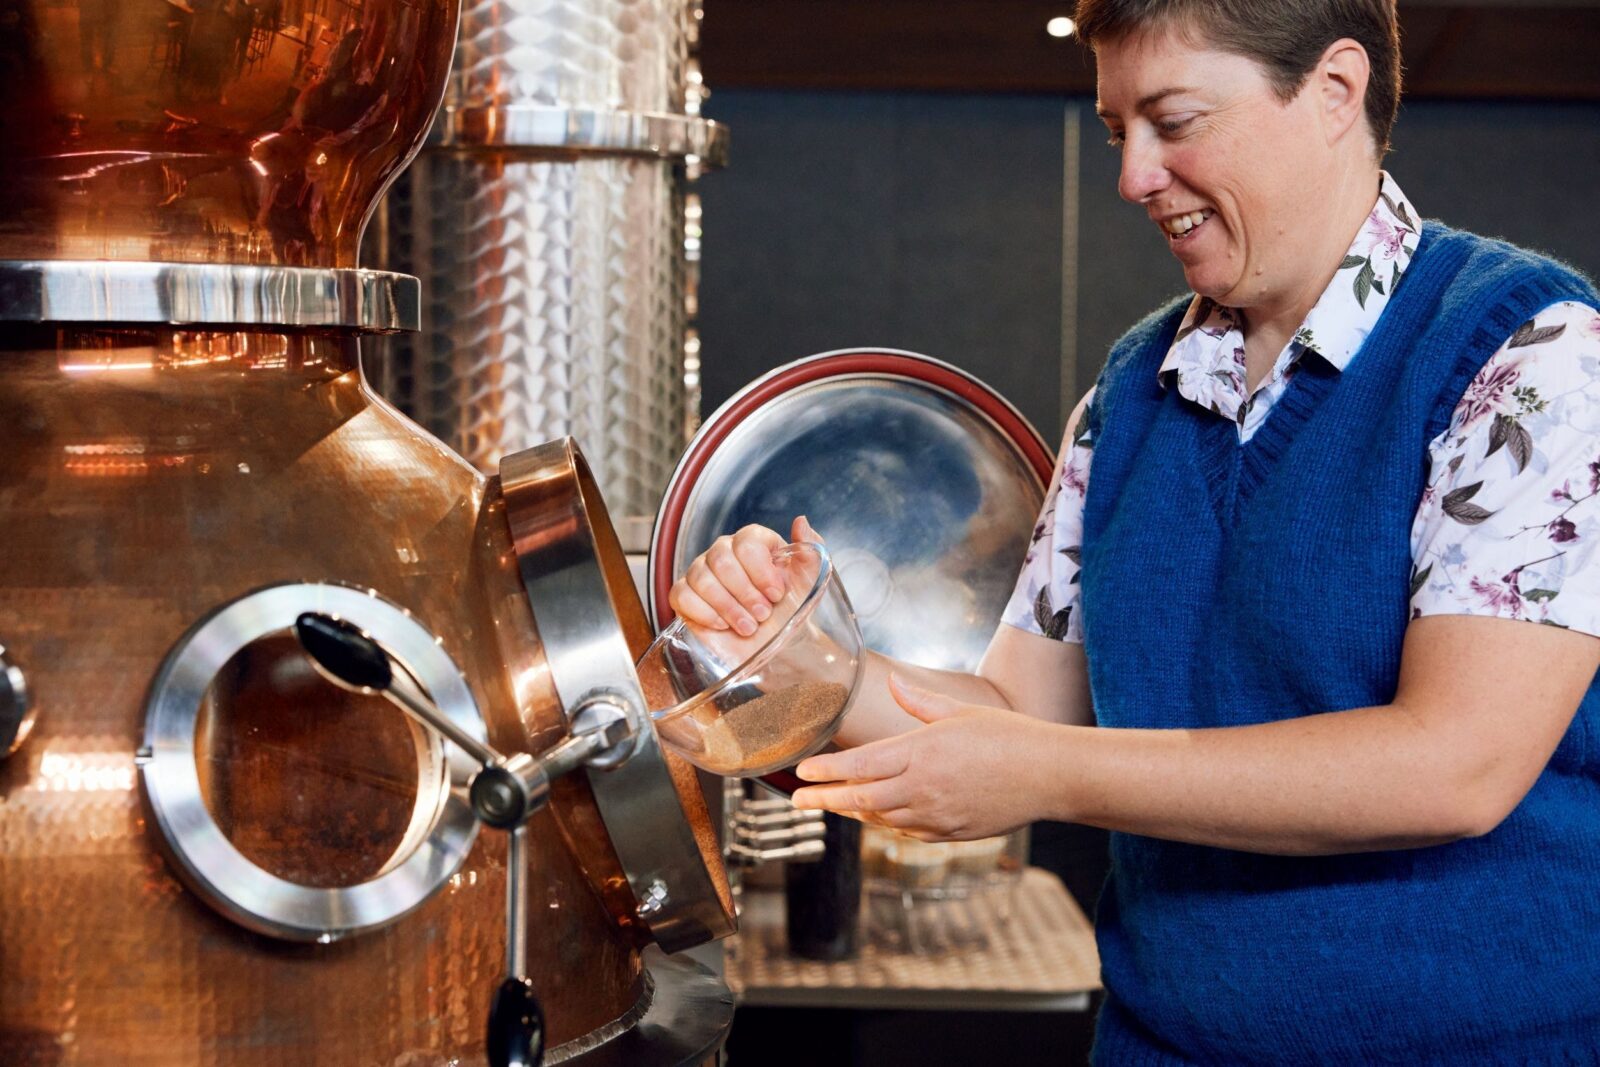 Guest putting gin botanicals into the still